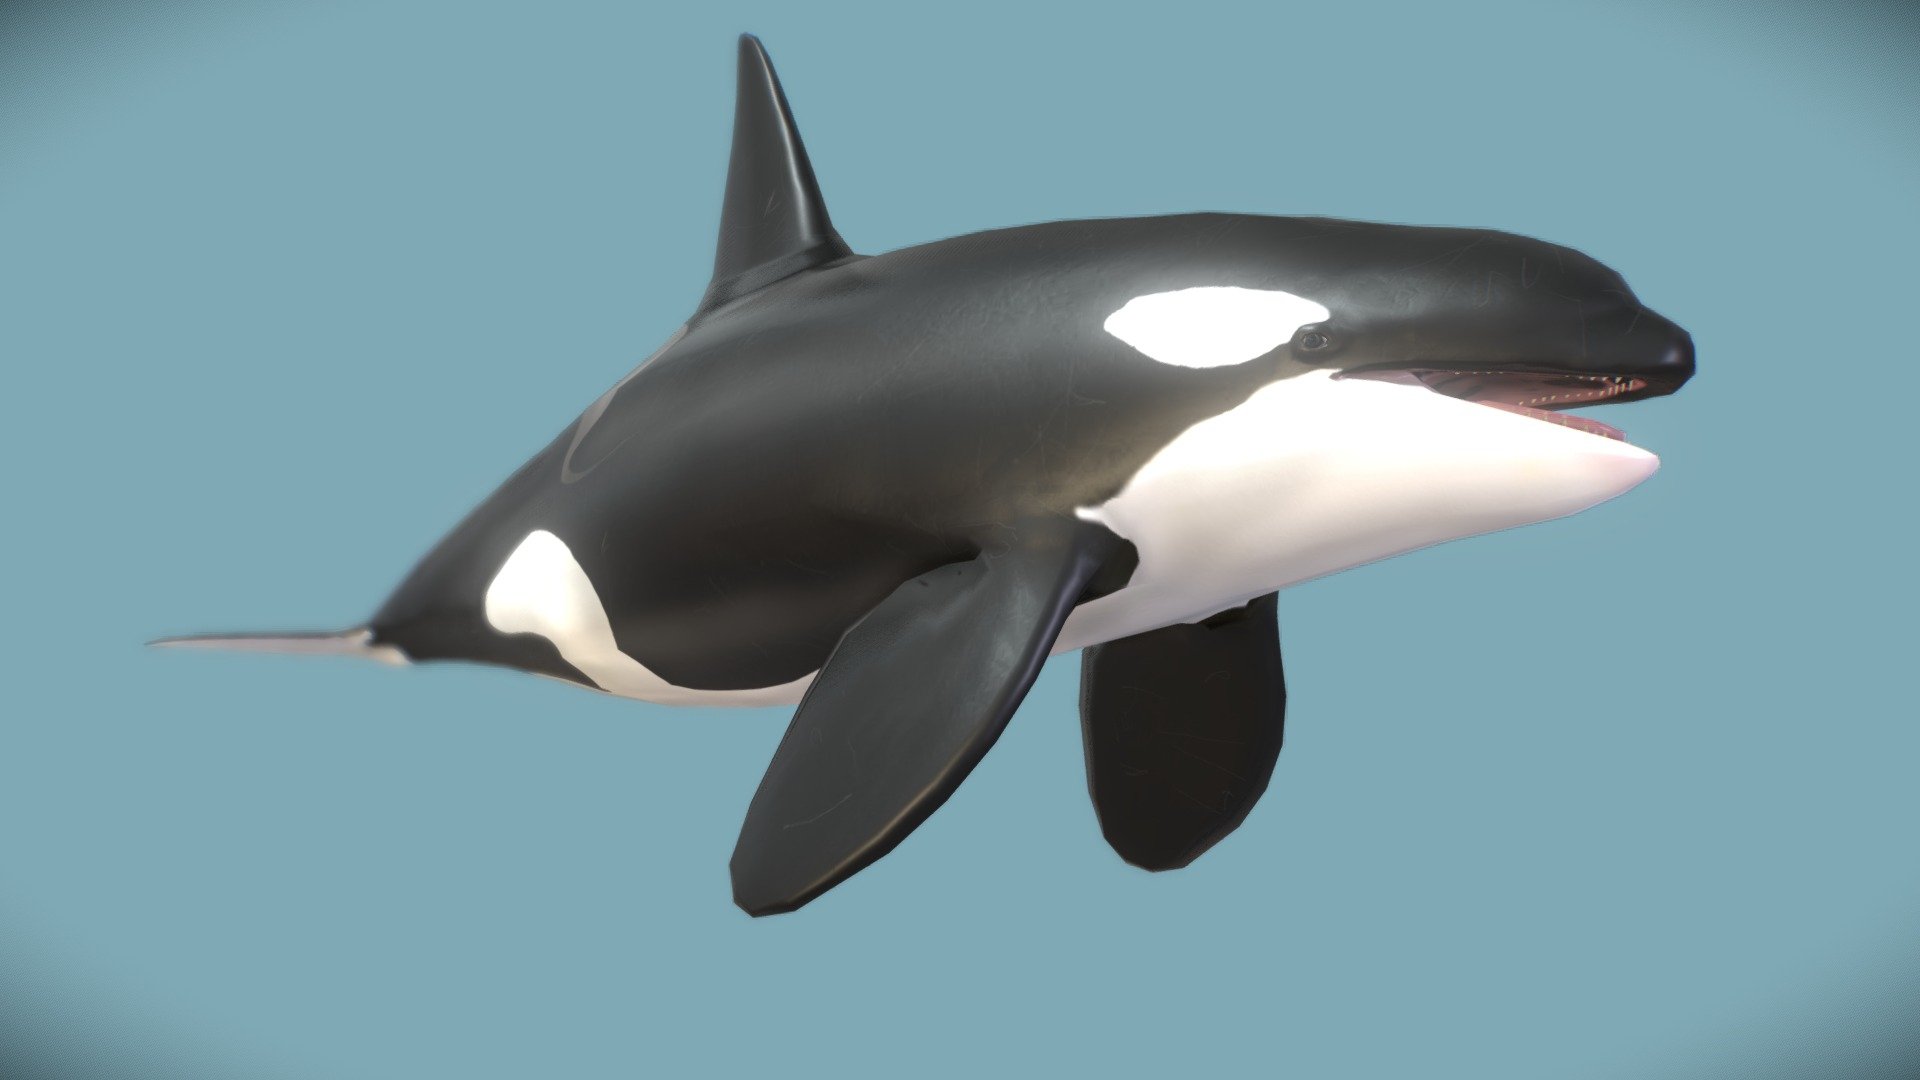 Orca i made for roblox the reef - Low poly killer whale (Orcinus orca) - 3D model by Major (@majorgalah) 3d model